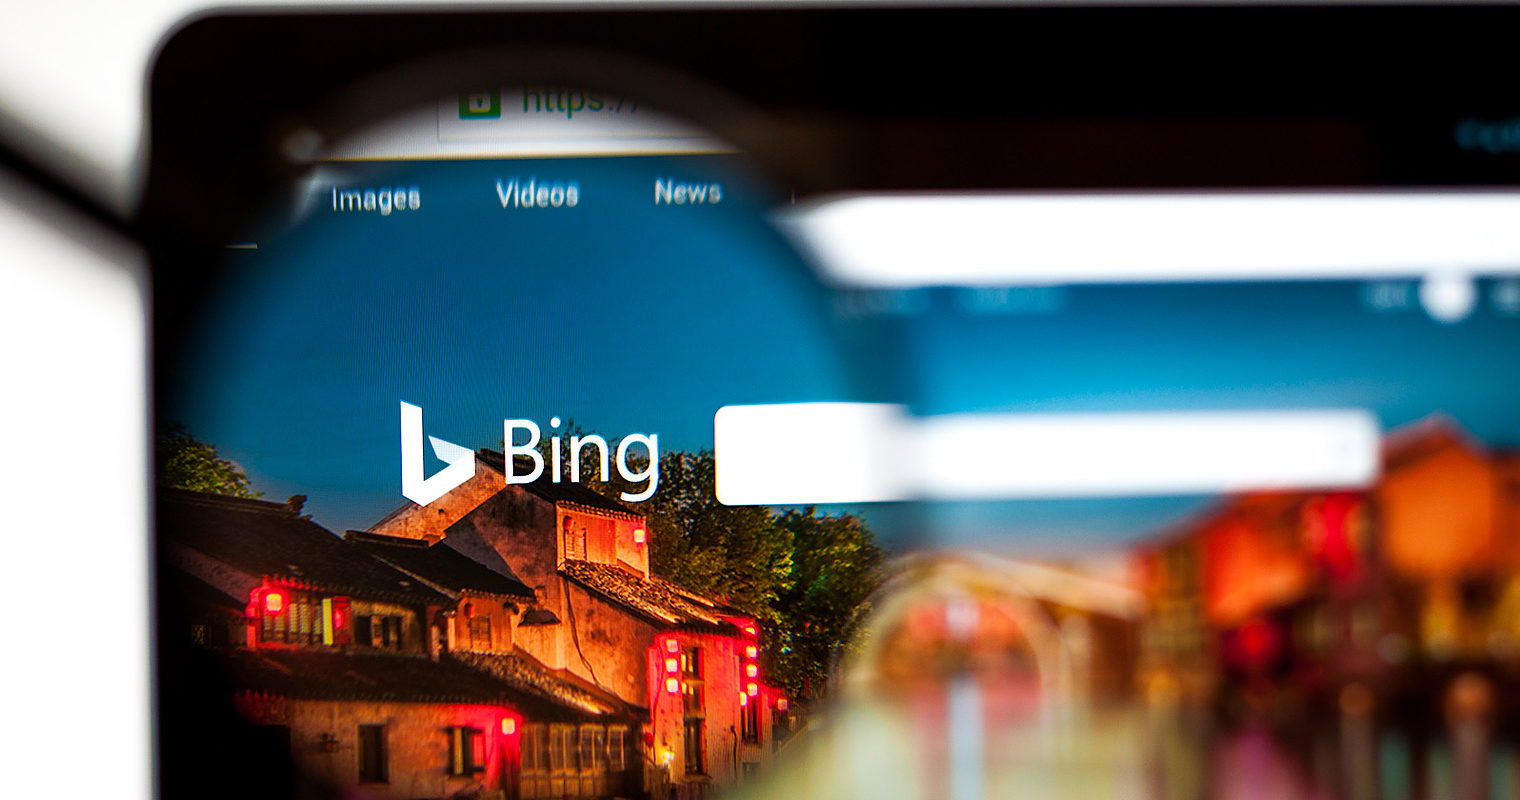 Bing Implements UX Change to Reduce Missed Clicks